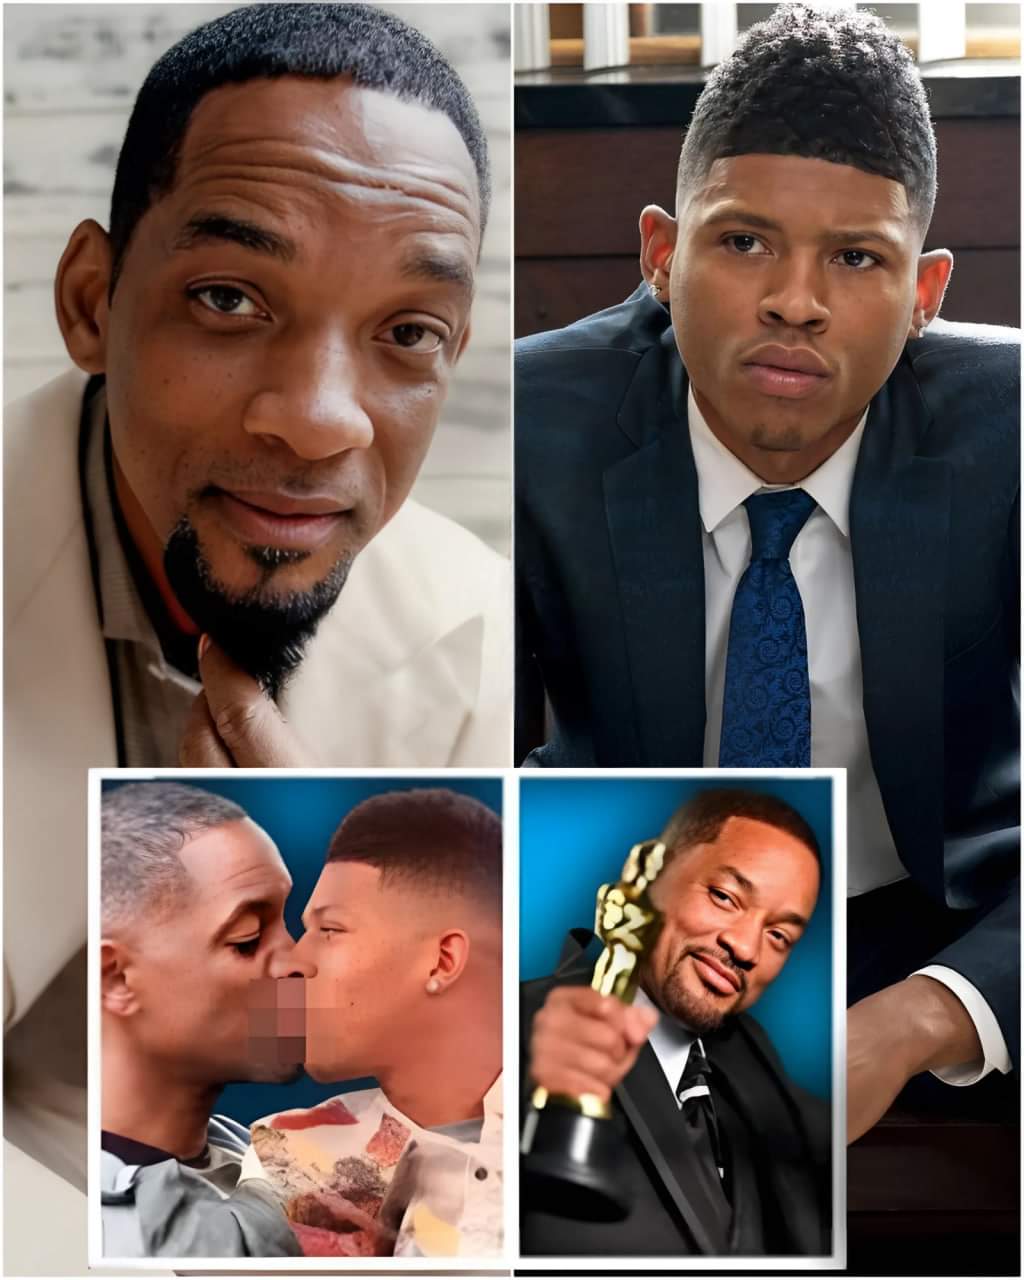 (Video) Breaking news: Bryshere Gray reveals how Will Smith forced him to become g@y